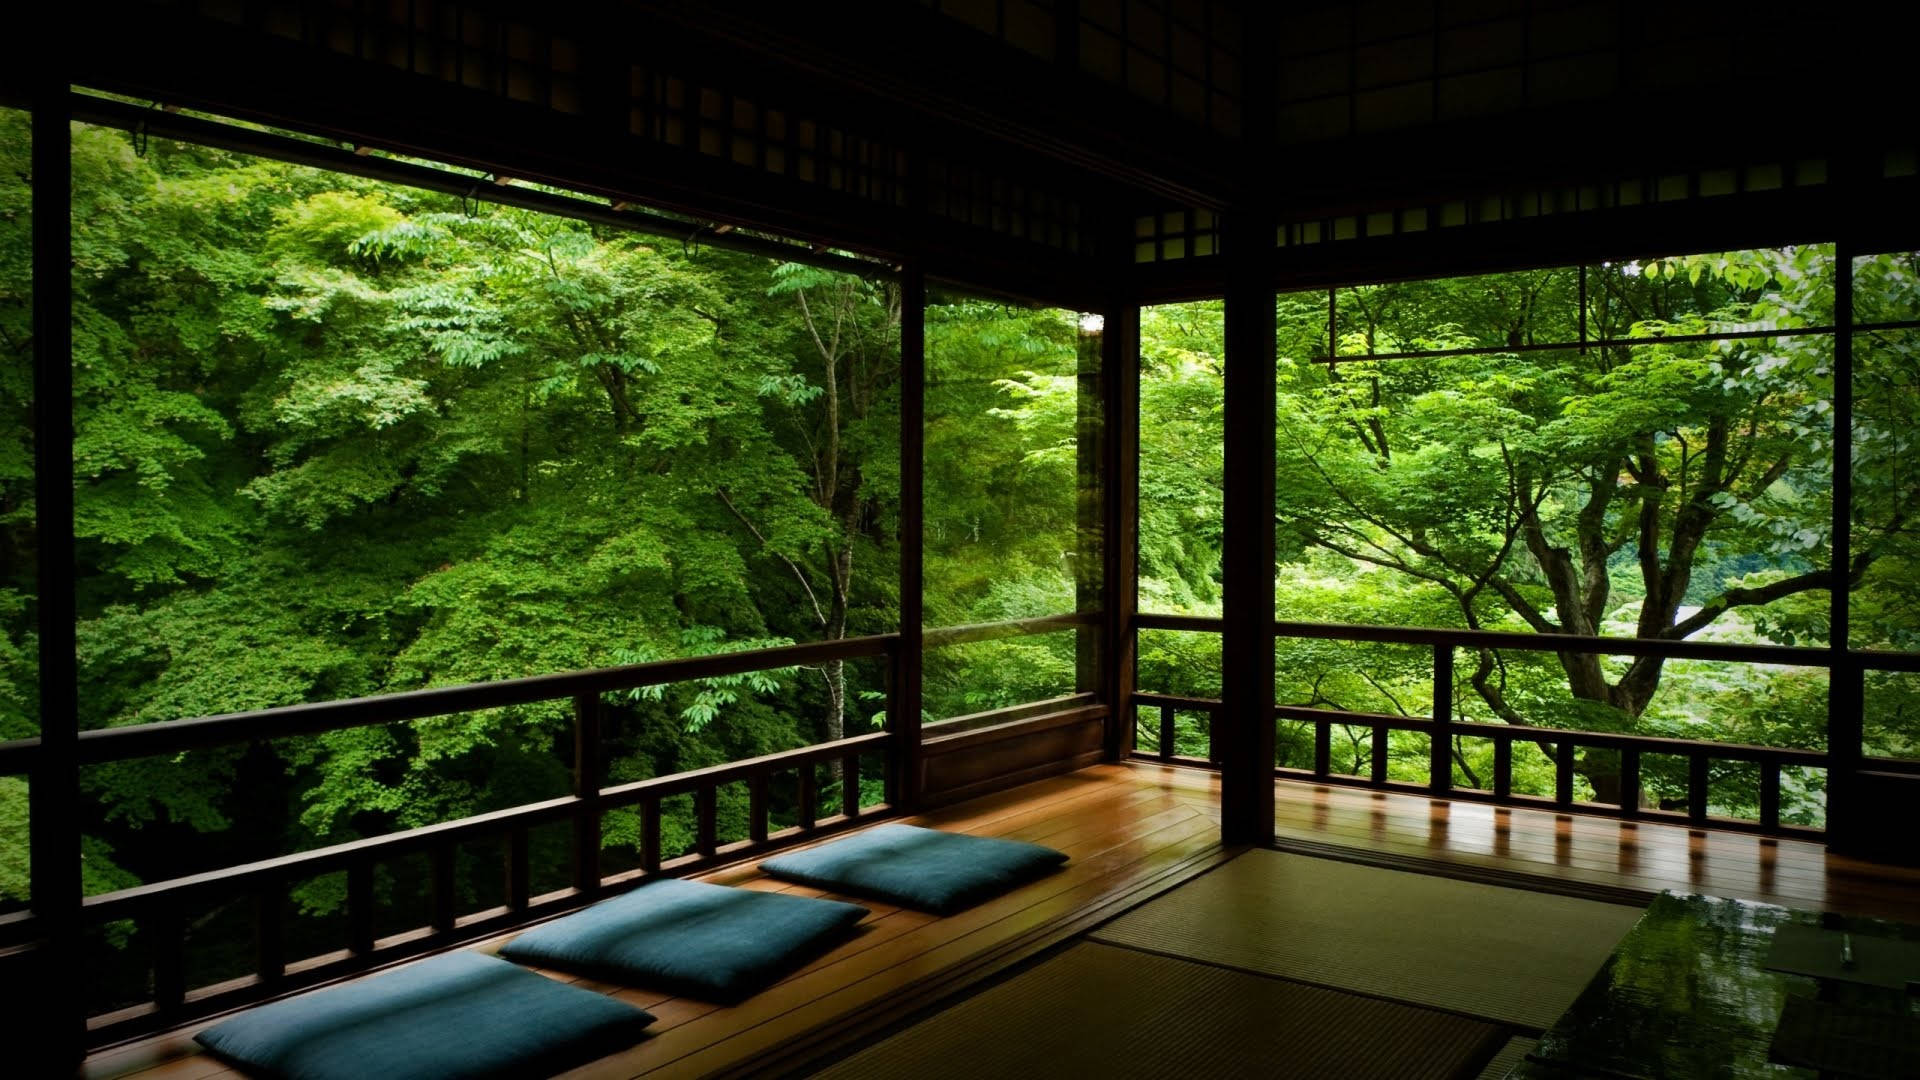 Serenity In Simplicity - The Japanese Tea Room Meditation Haven